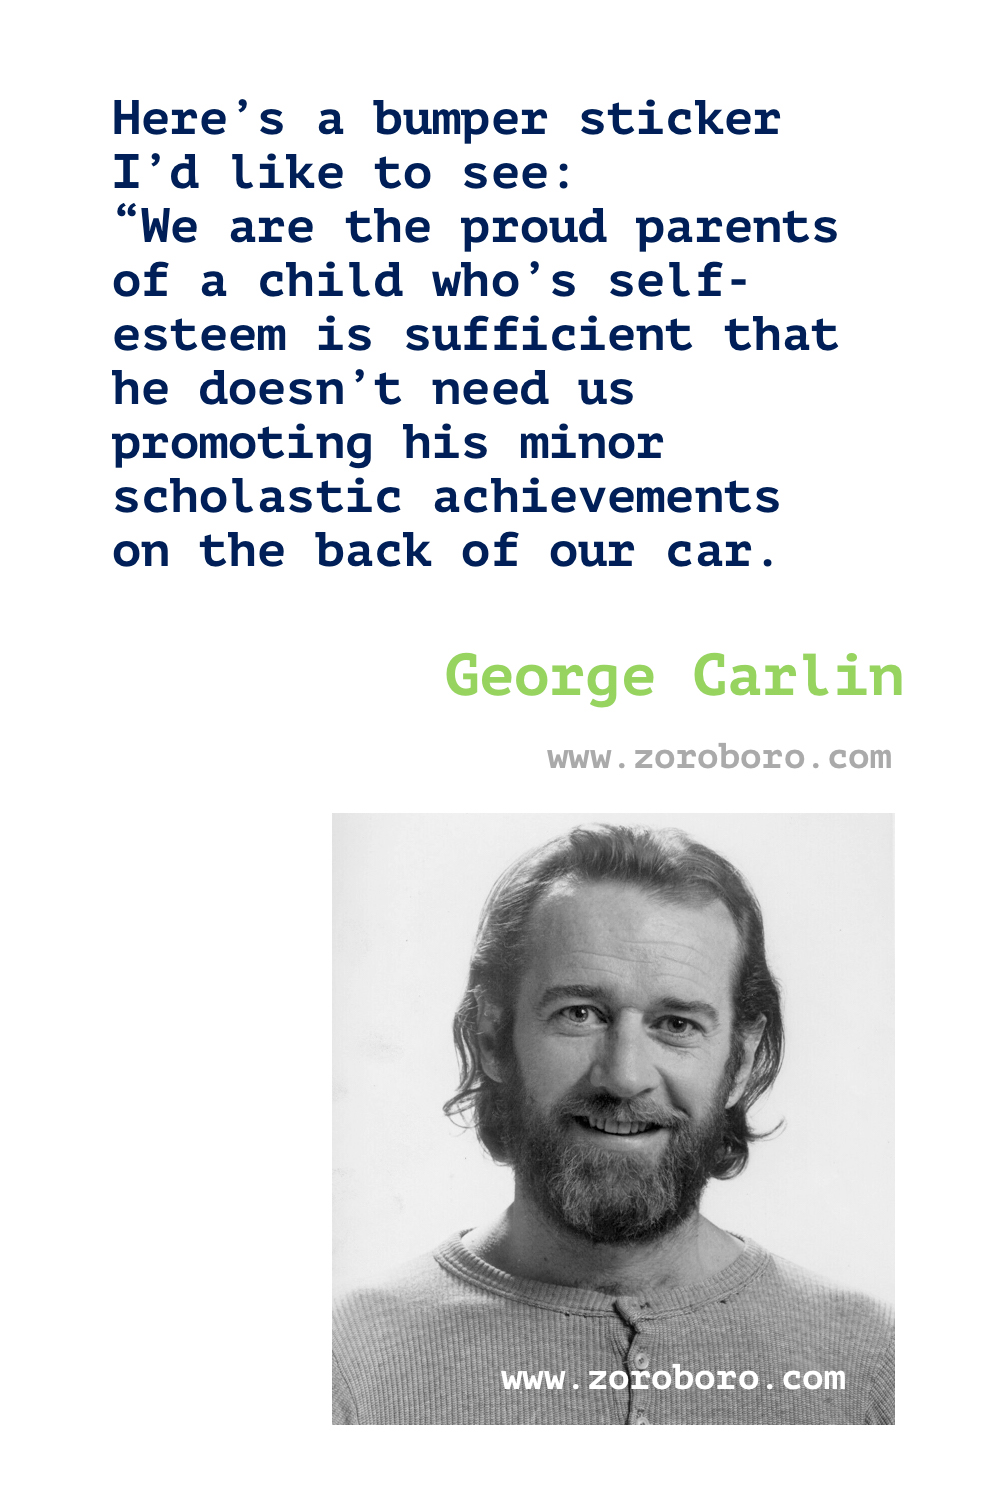 George Carlin Quotes. George Carlin Books Quotes. George Carlin Funny Stand-up Quotes. George Carlin Comedian.george carlin quotes something to ponder.george carlin quotes on politics.george carlin quotes government.george carlin quotes on america.george carlin quote about life.george carlin quotes life is not measured.george carlin quotes on death.george carlin quotes on war